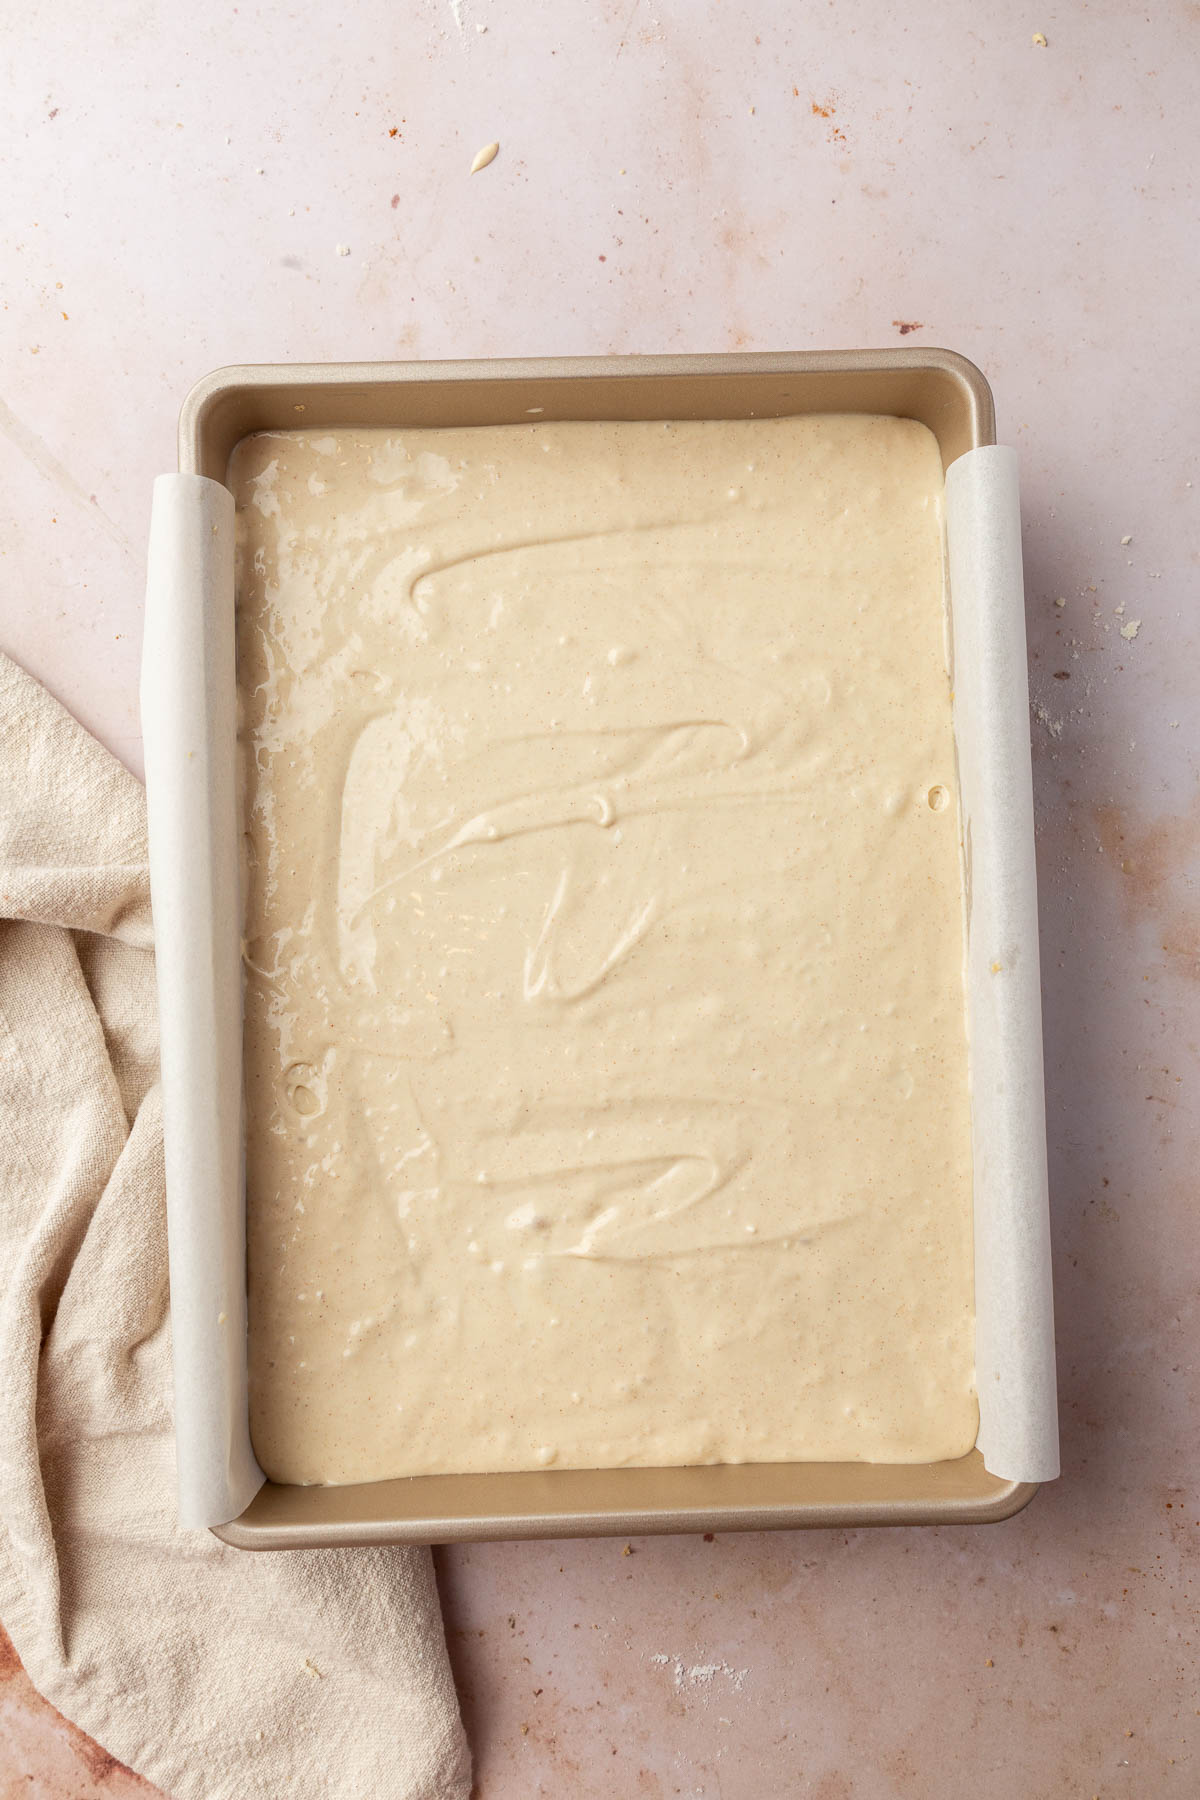 A metal rectangular baking pan lined with parchment paper and filled with a cheesecake batter before baking in the oven.